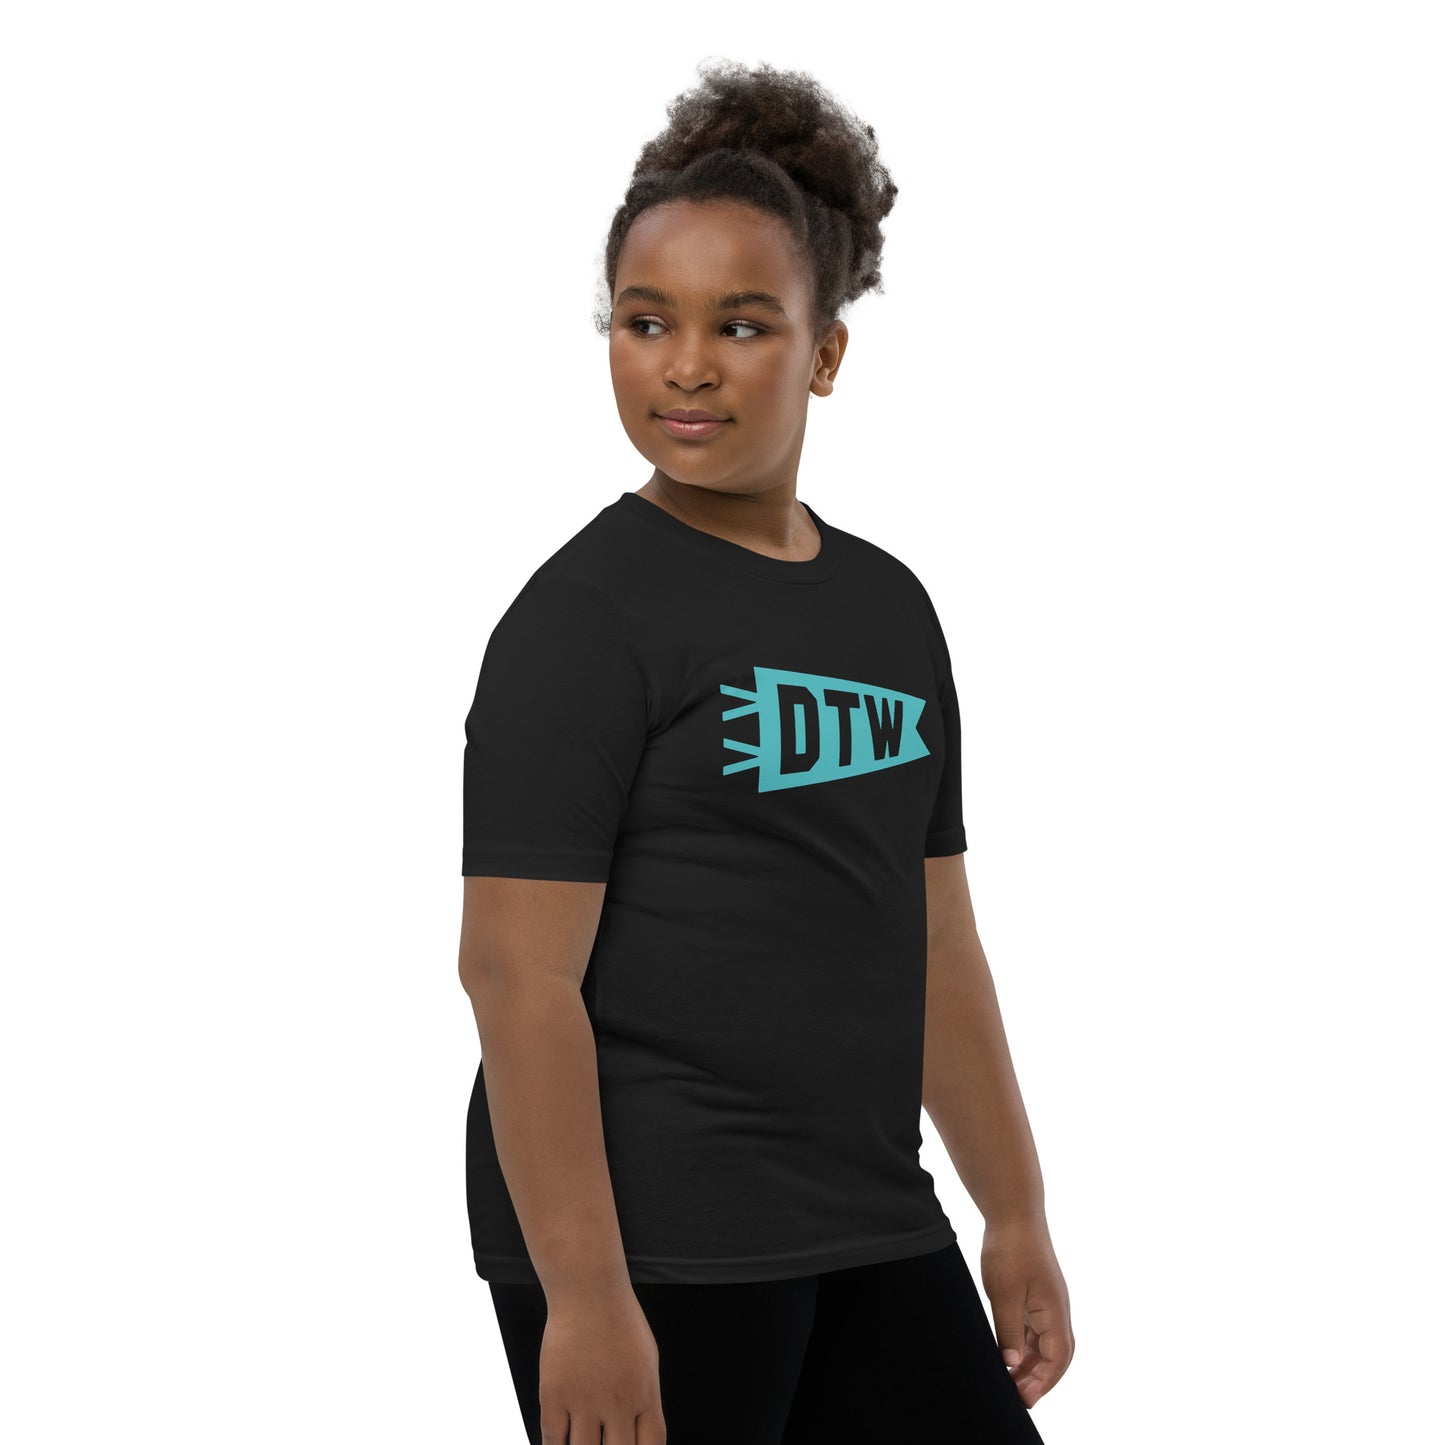 Kid's Airport Code Tee - Viking Blue Graphic • DTW Detroit • YHM Designs - Image 03